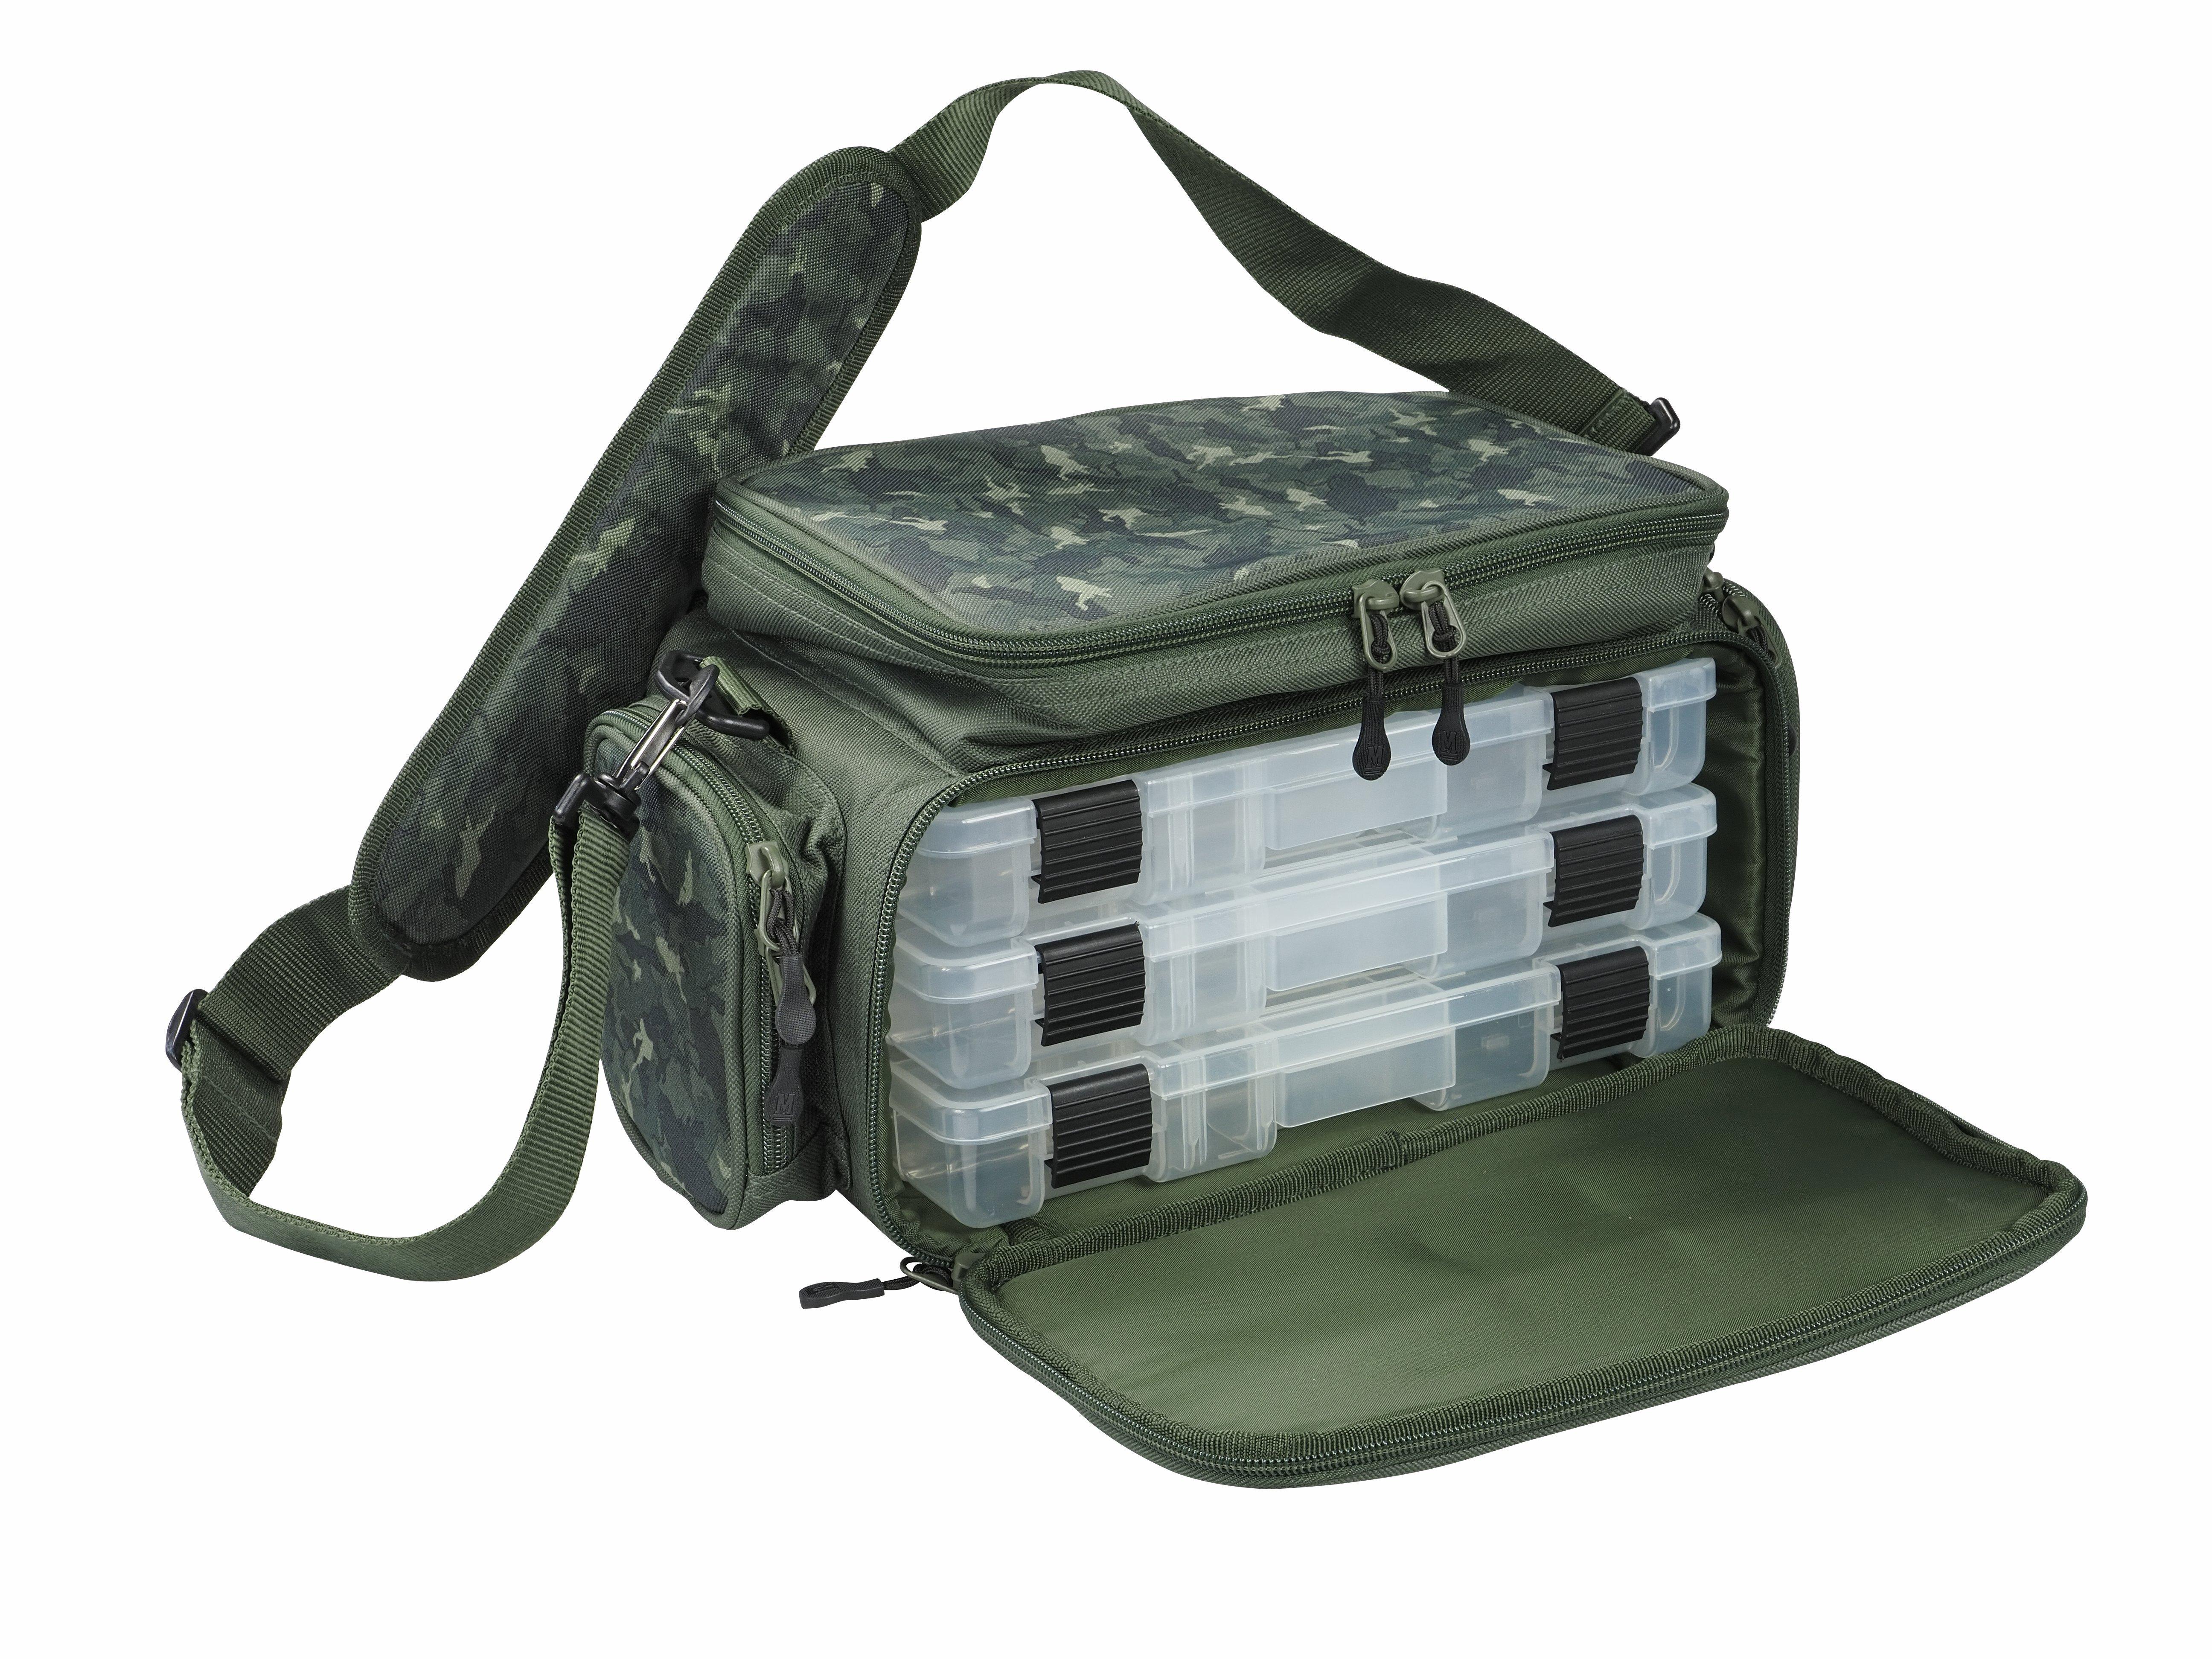 Mitchell MX Camo Stacker Fishing Bag (Incl. Tackle Boxes)